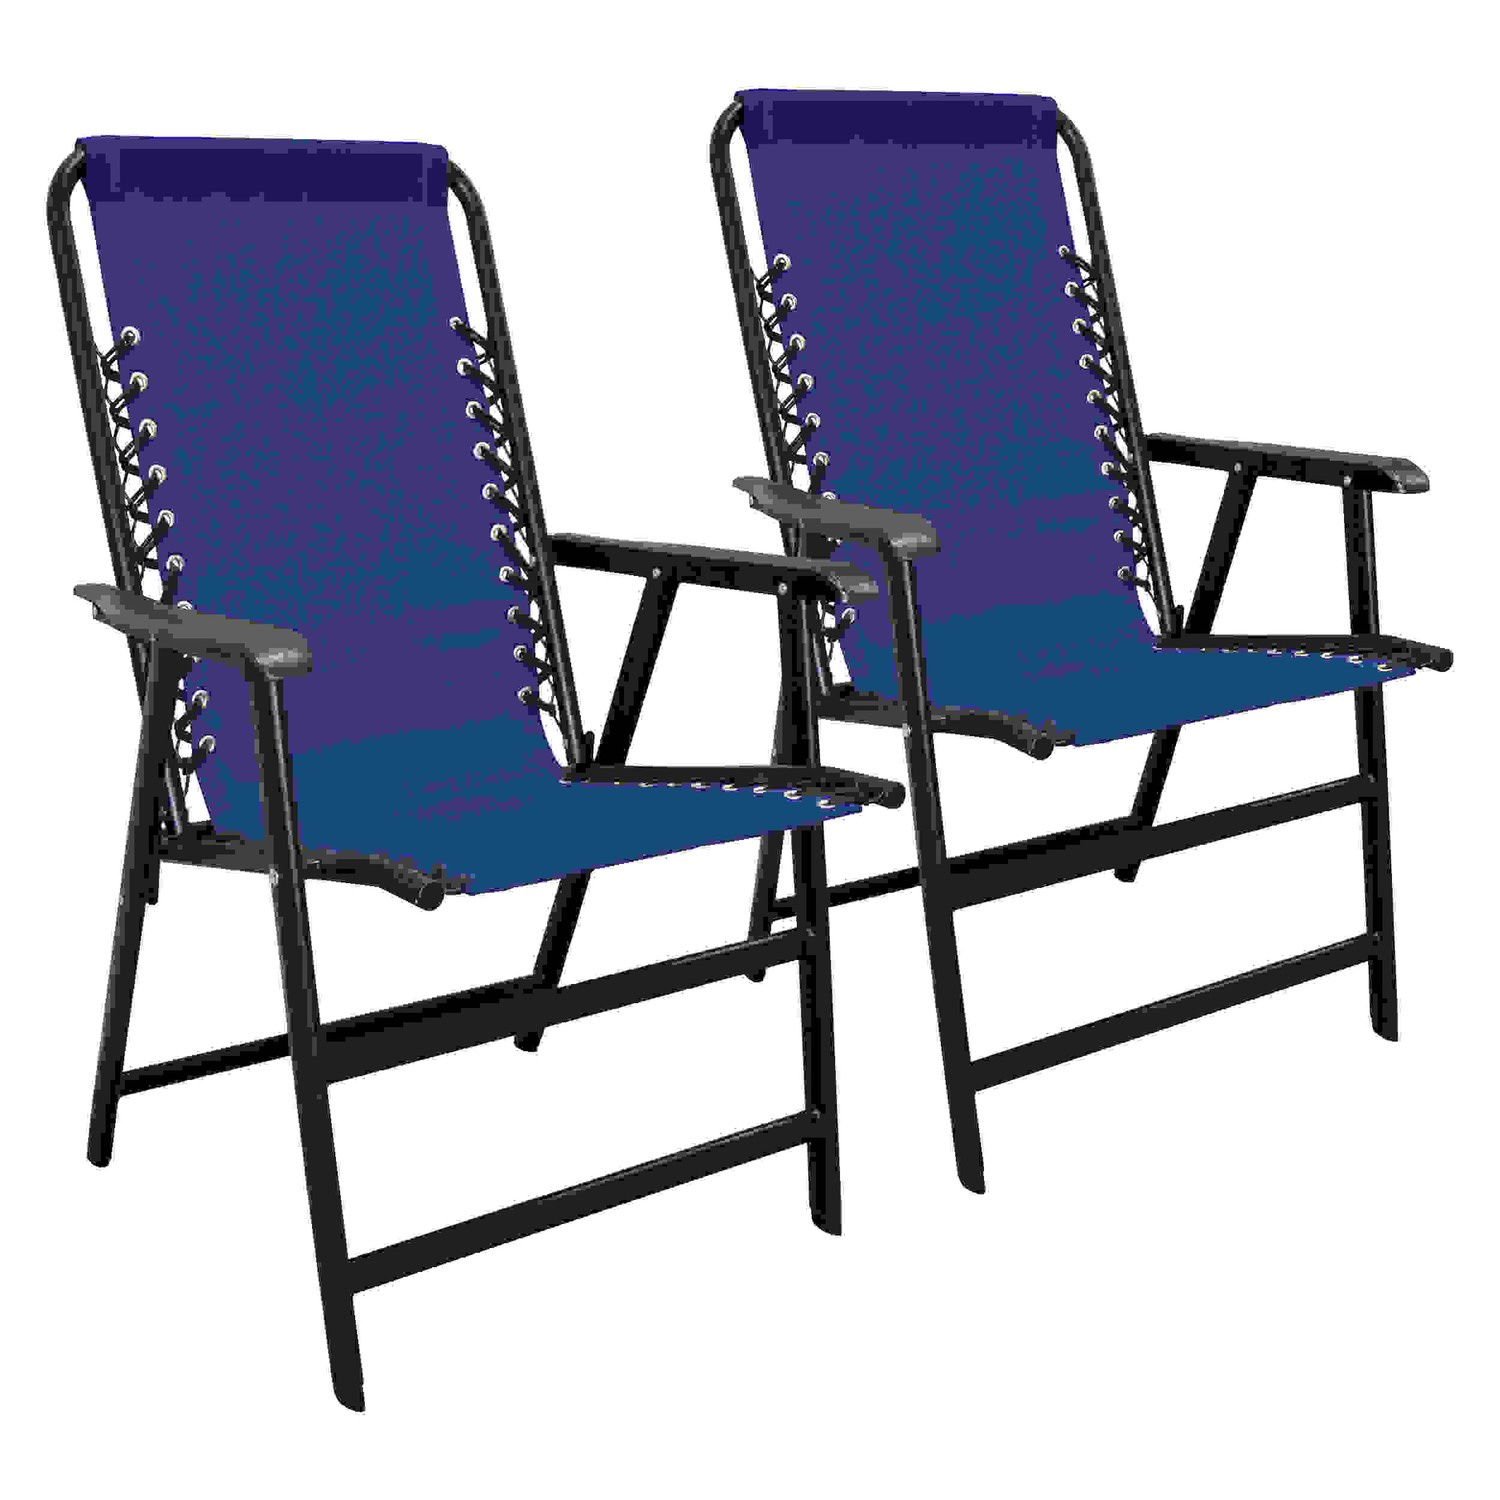 Suspension Folding chair Blue 2PACK